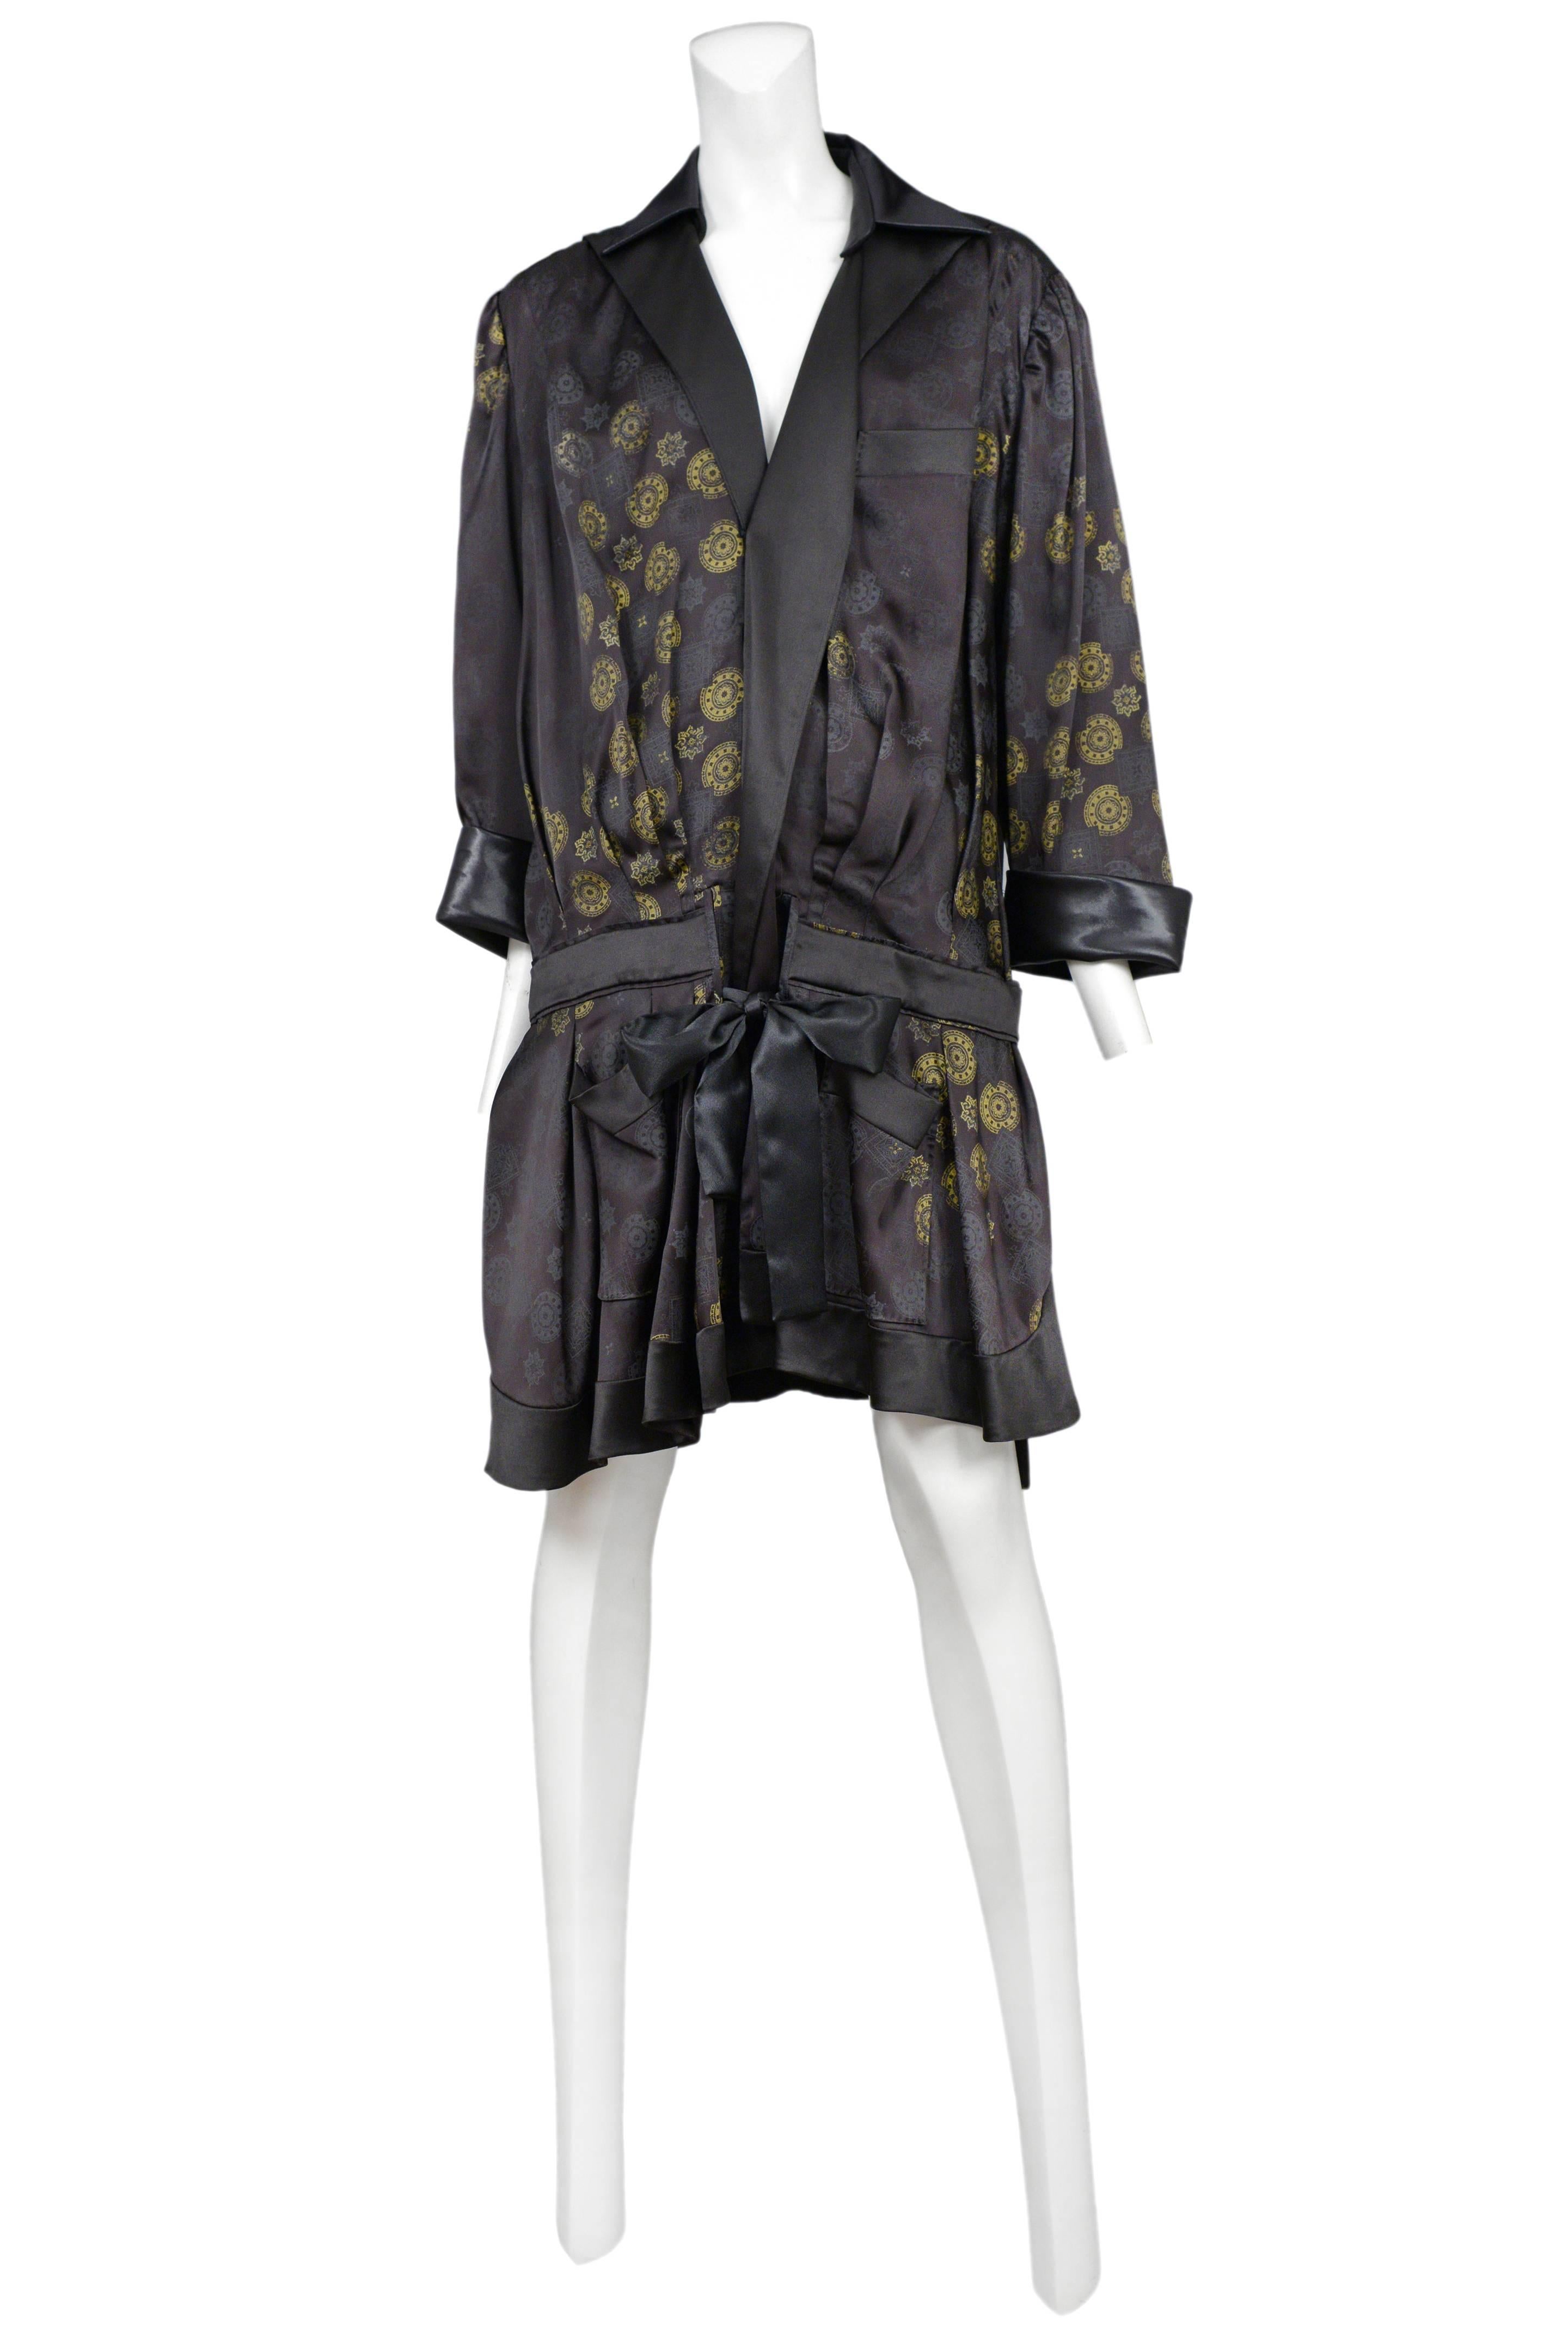 Vintage Nicolas Ghesquière for Balenciaga black satin smoking robe long sleeve dress featuring a built in dropped waist belt, a gathered skirt, a chest pocket and an allover black and gold abstract gear print. Runway piece from the Spring / Summer